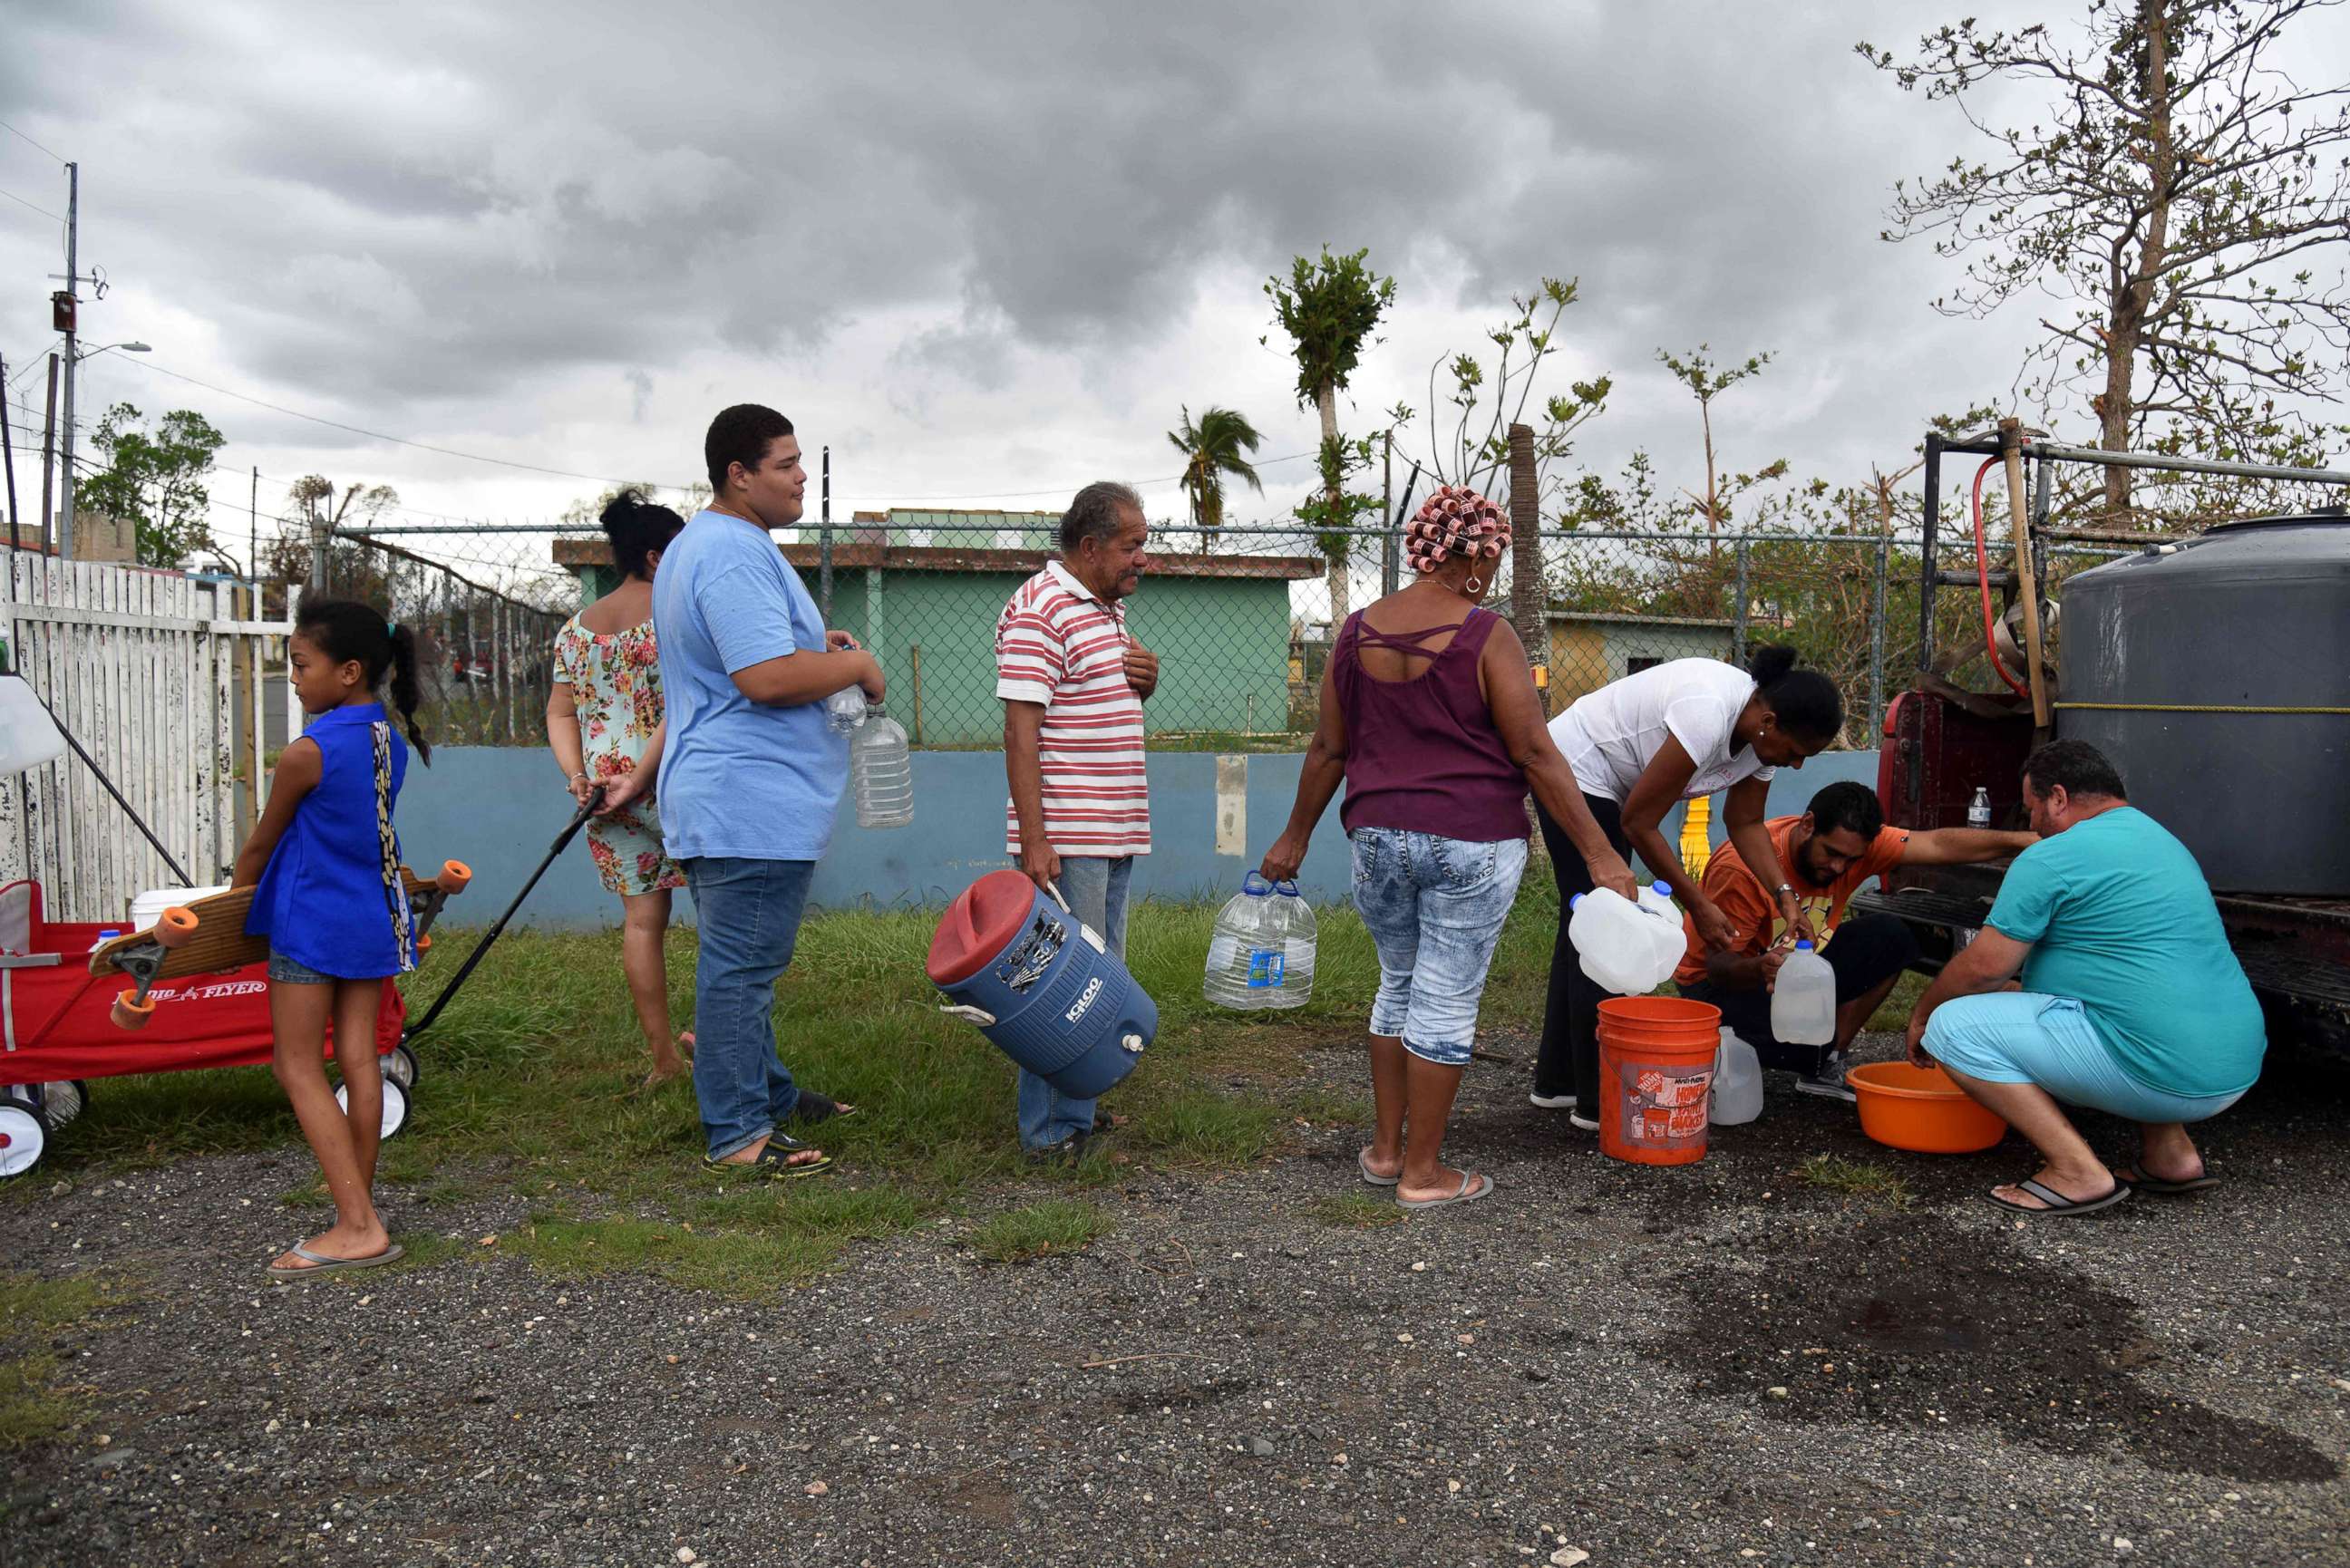 PHOTO: People take water from a tank in Vega Baja, Puerto Rico, Sept. 30, 2017, due to the lack of water after the passage of Hurricane Maria.
